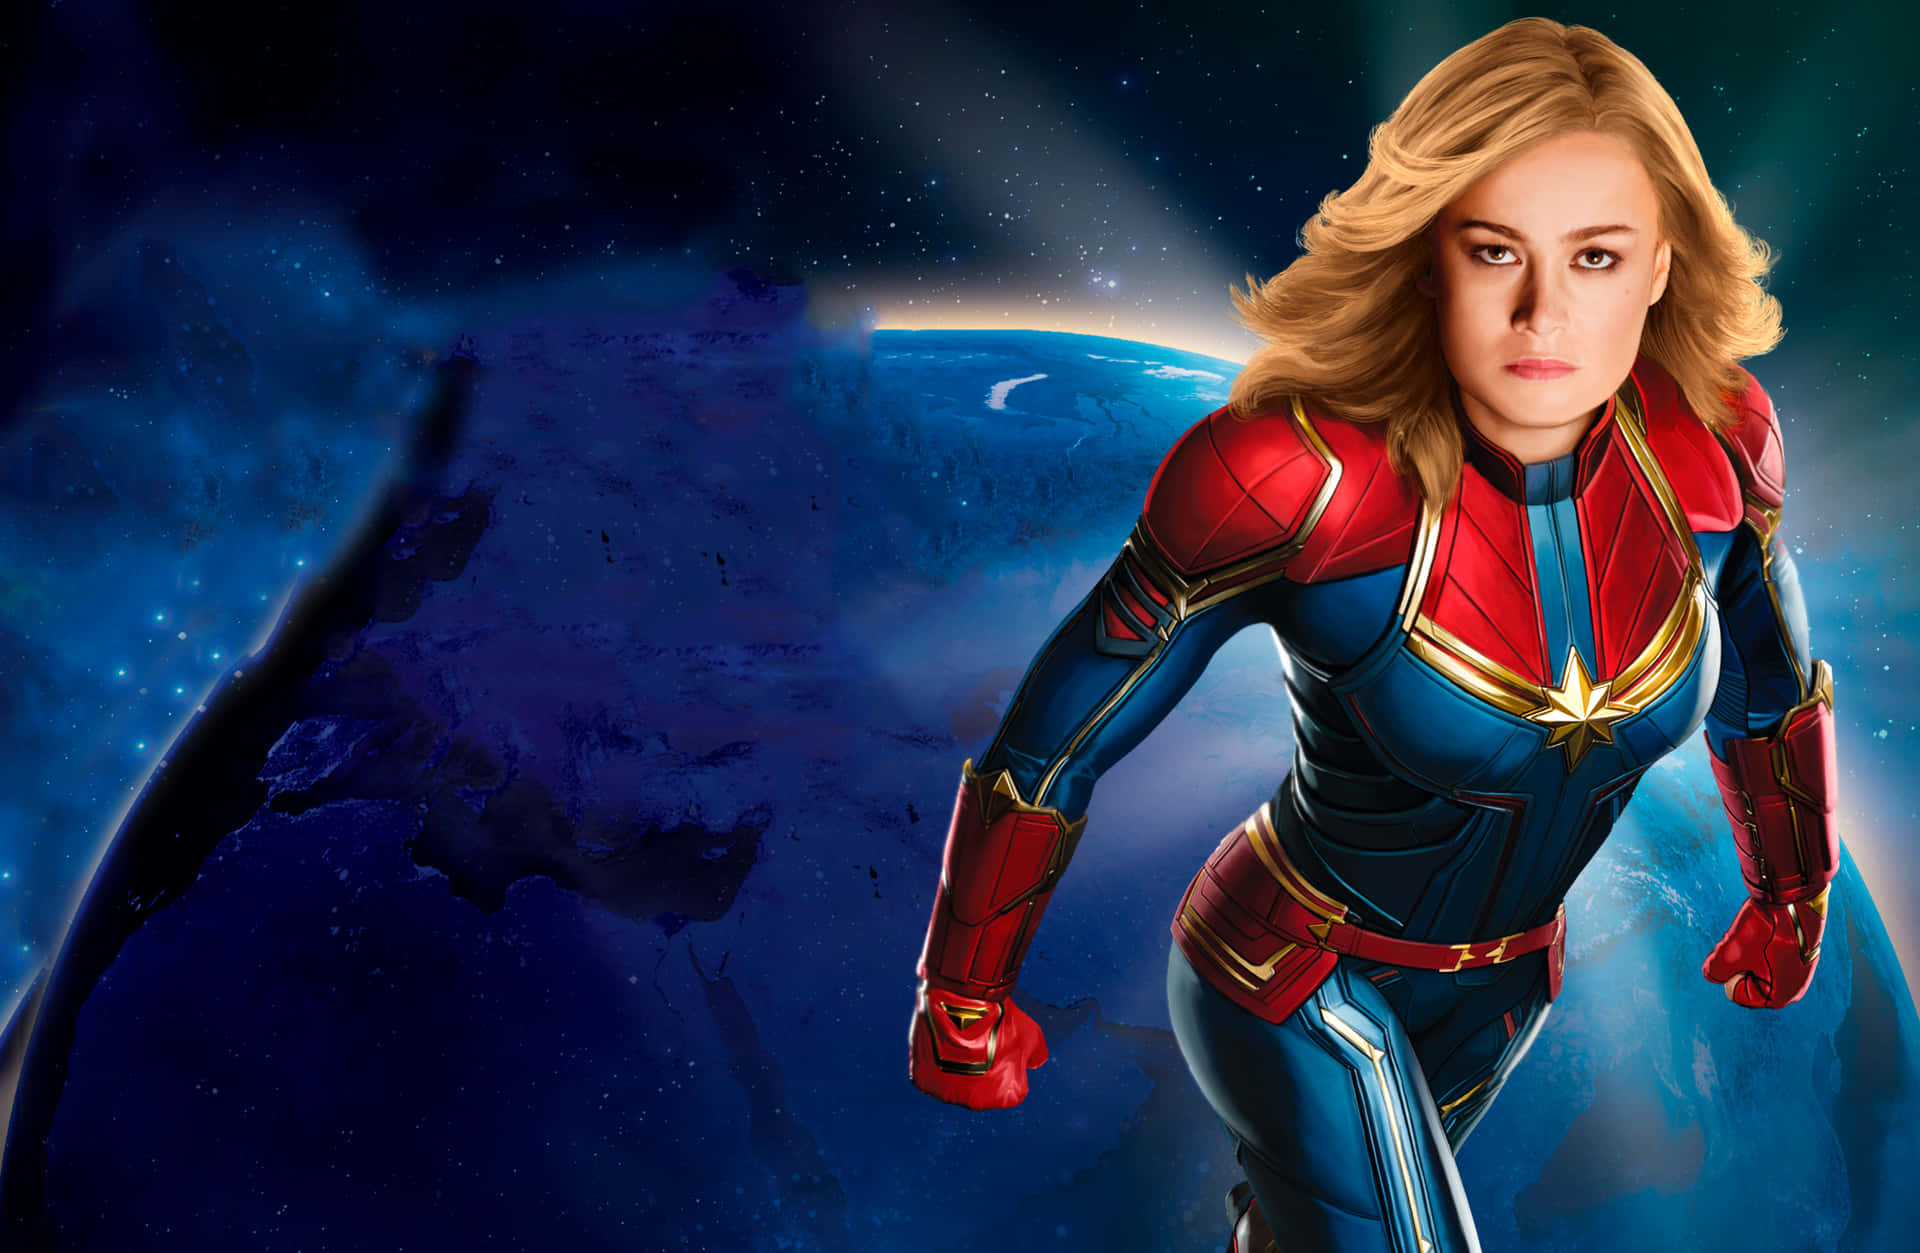 Carol Danvers, A.K.A. Captain Marvel, inspired by Stan Lee and Jack Kirby comic characters. Wallpaper